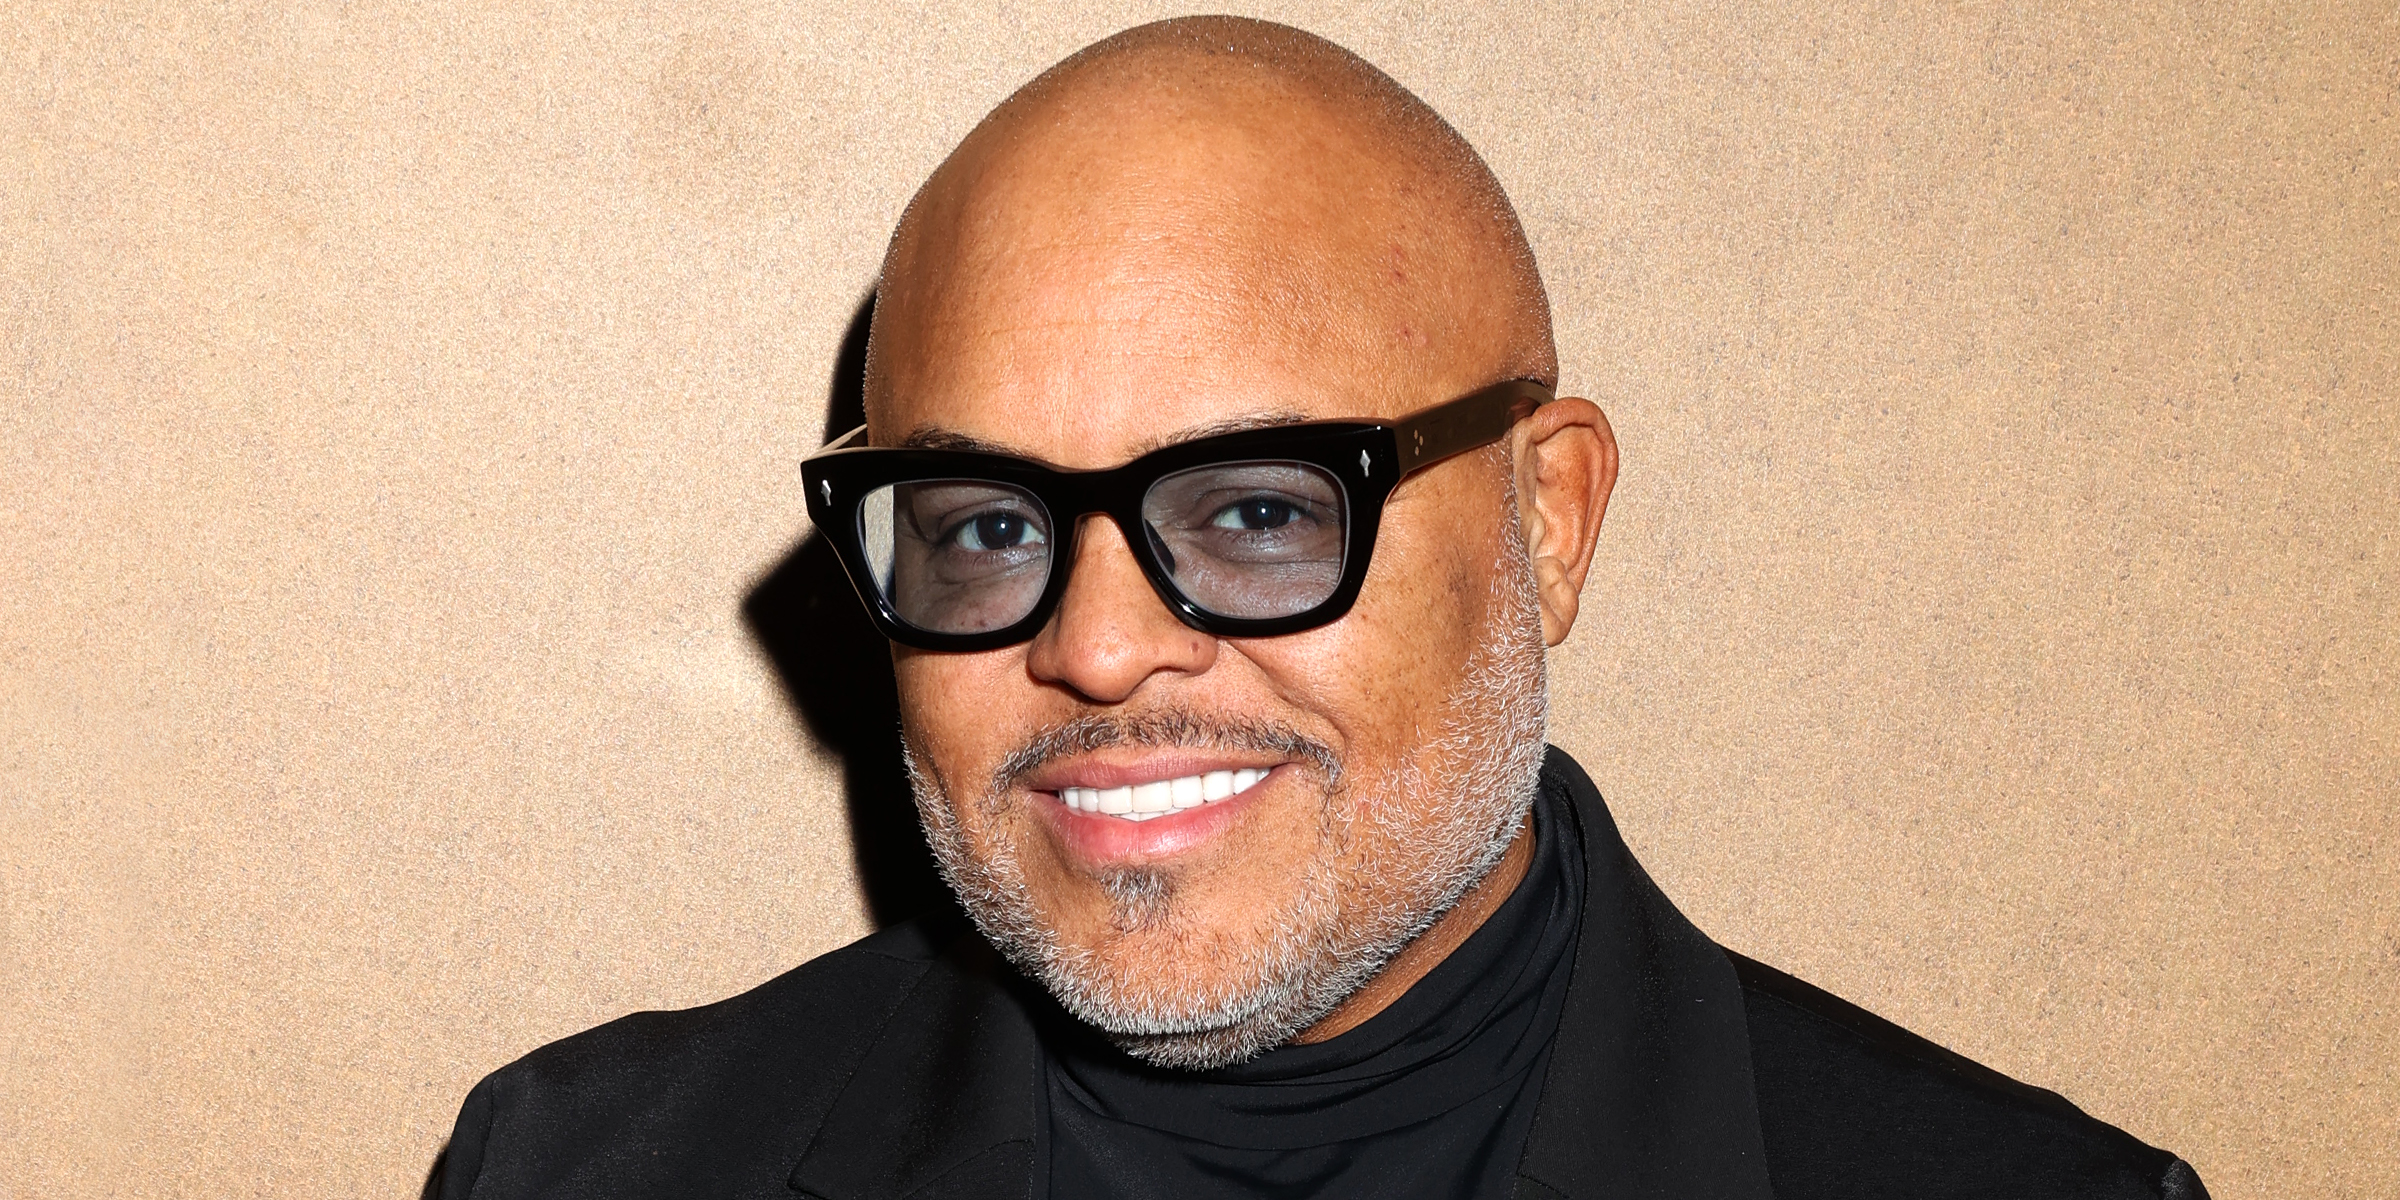 Israel Houghton | Source: Getty Images